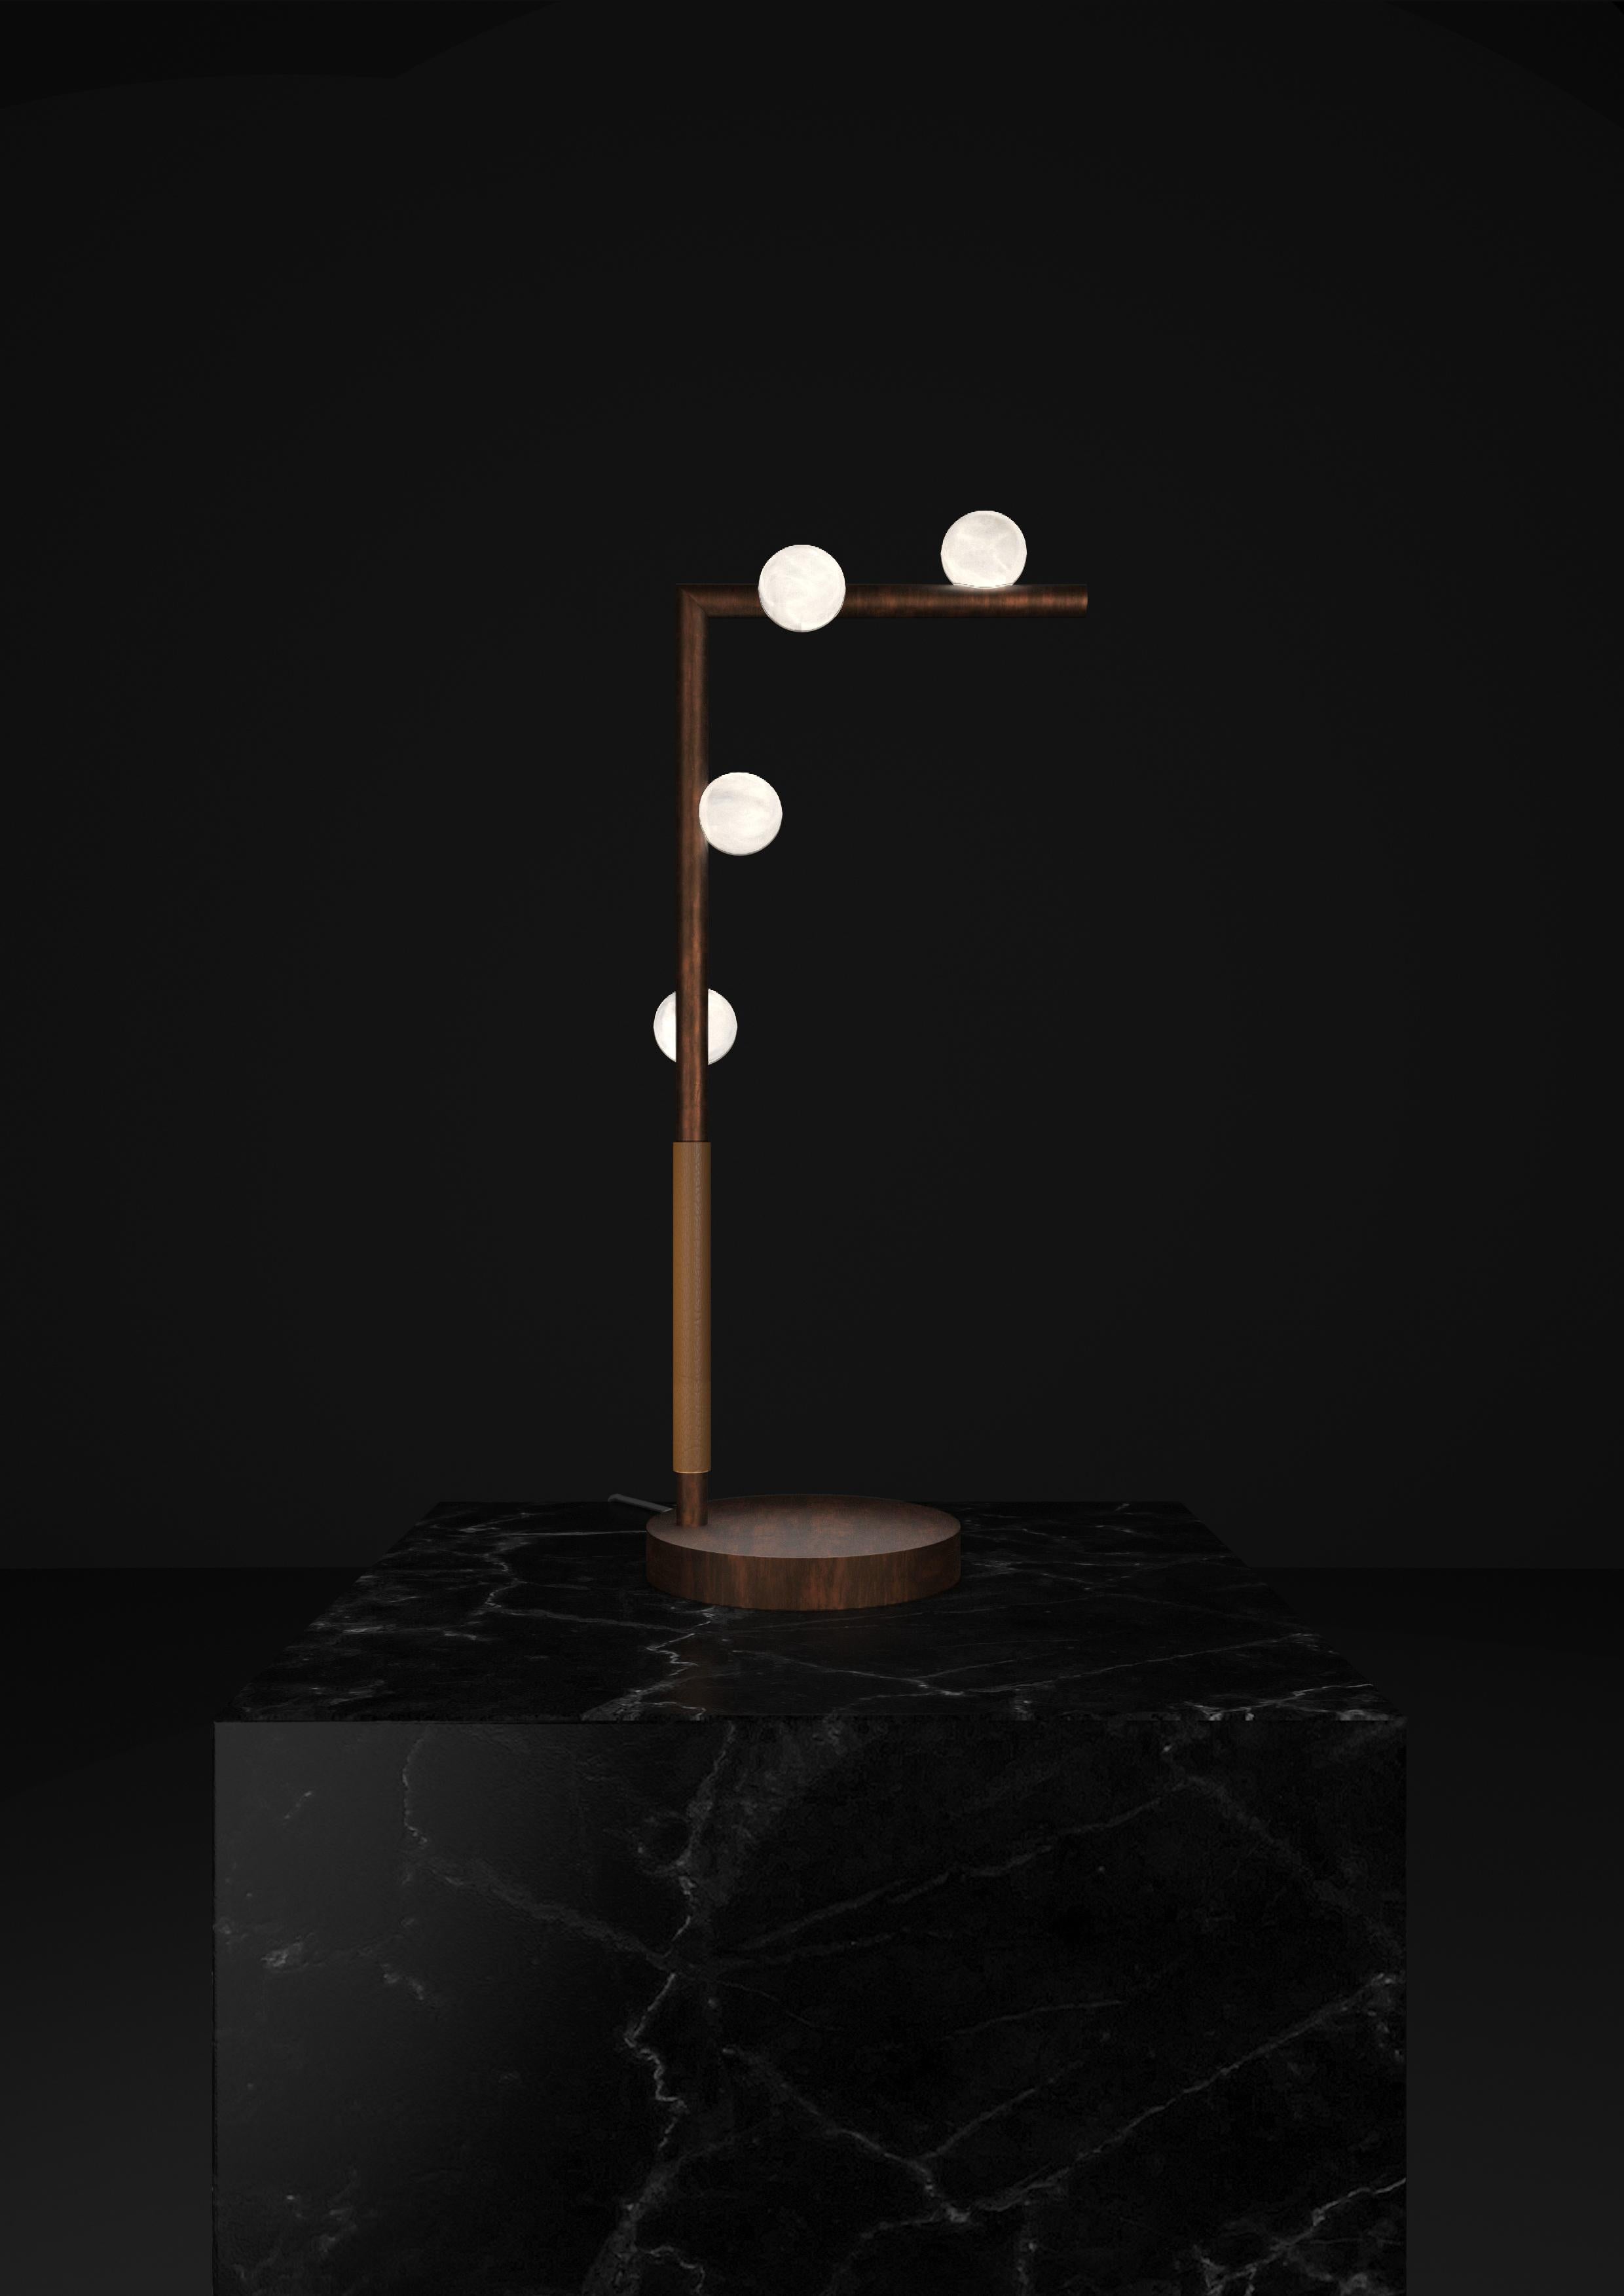 Demetra Ruggine Of Florence Metal Table Lamp by Alabastro Italiano
Dimensions: D 20 x W 35 x H 67 cm.
Materials: White alabaster, metal and leather.

Available in different finishes: Shiny Silver, Bronze, Brushed Brass, Ruggine of Florence, Brushed